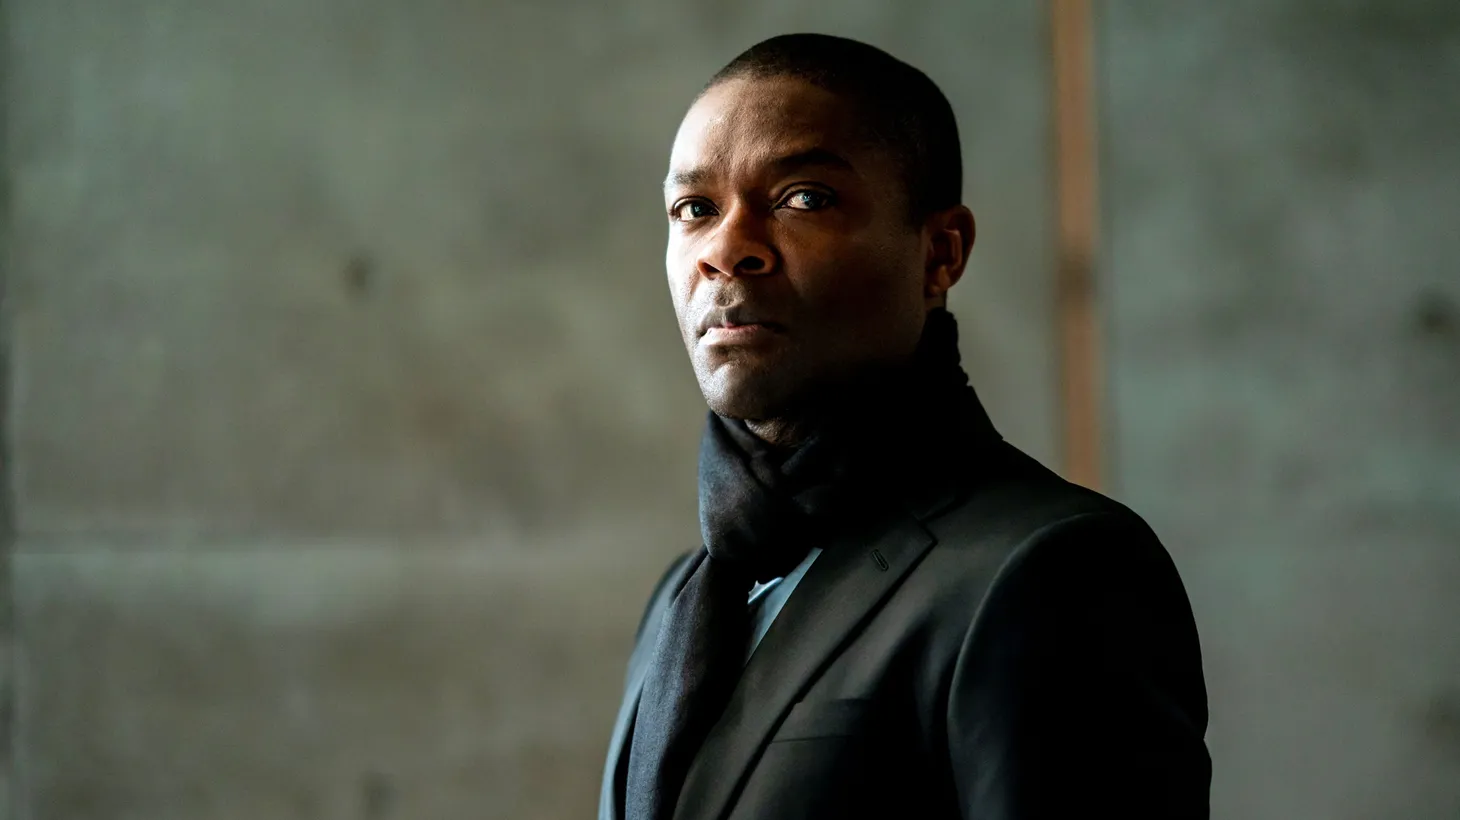 “He is a very complicated human being. When it comes to being a controlling individual, he is a full 10 out of 10,” David Oyelowo says of his character Edward Monkford in the new film “The Girl Before.”